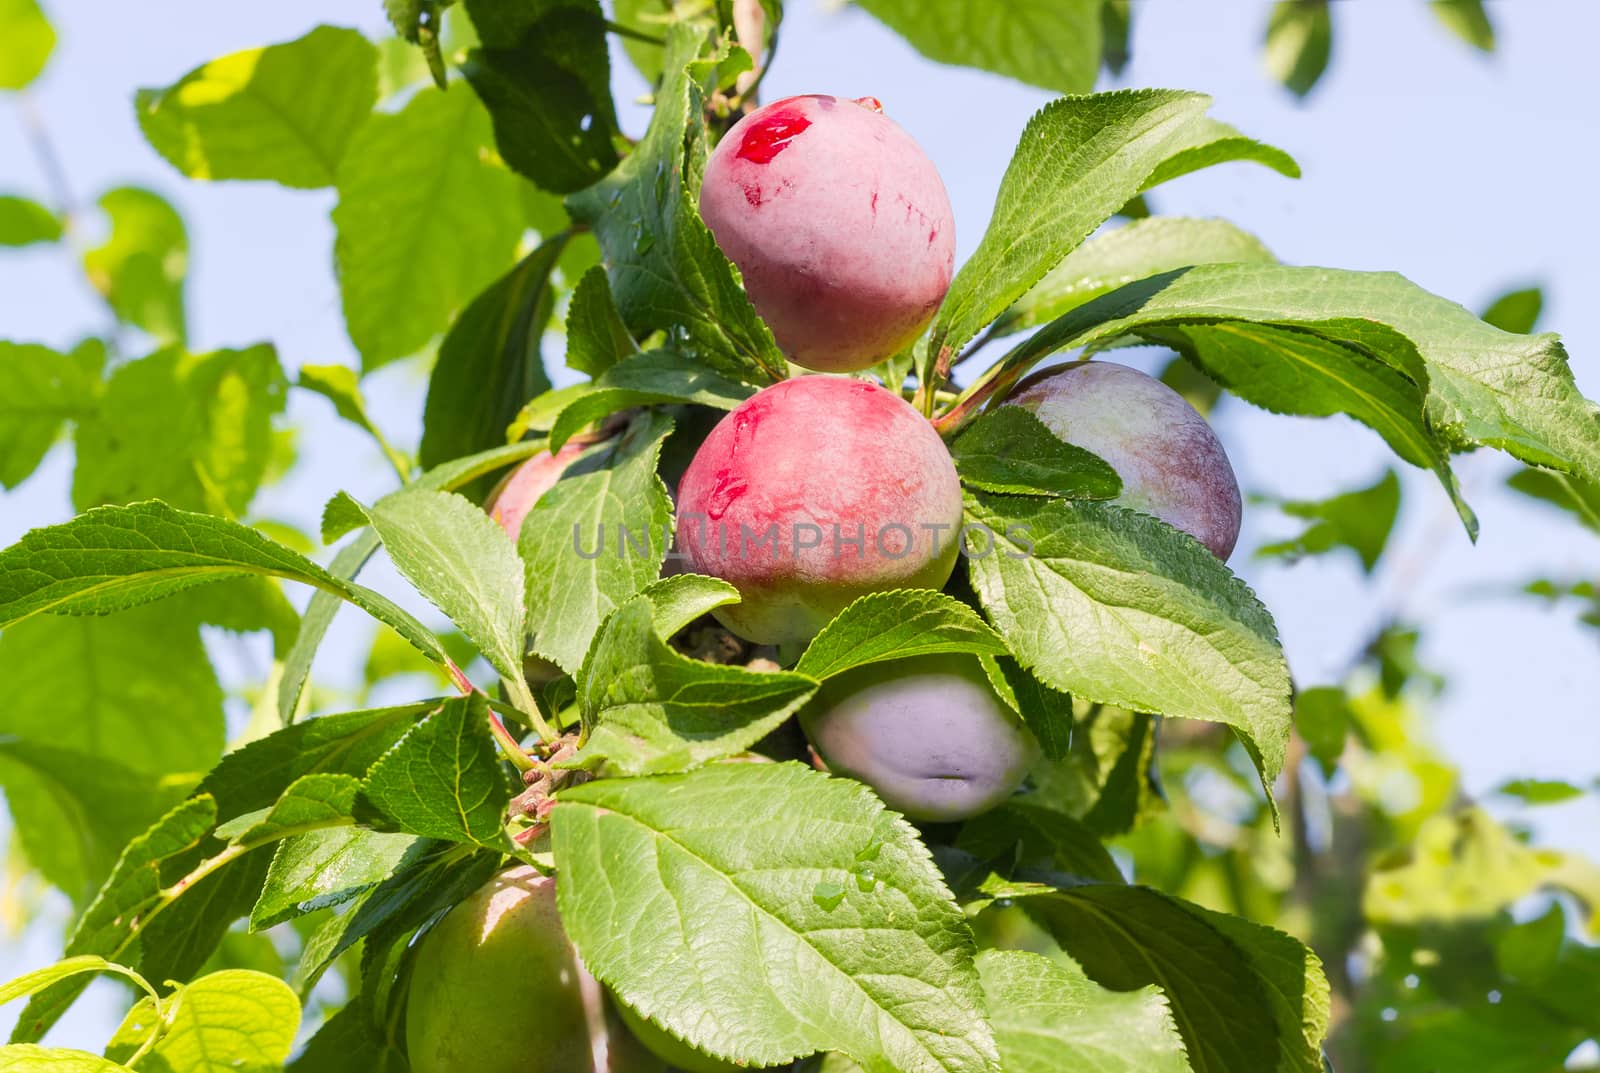 Plums on the tree in an orchard by anmbph